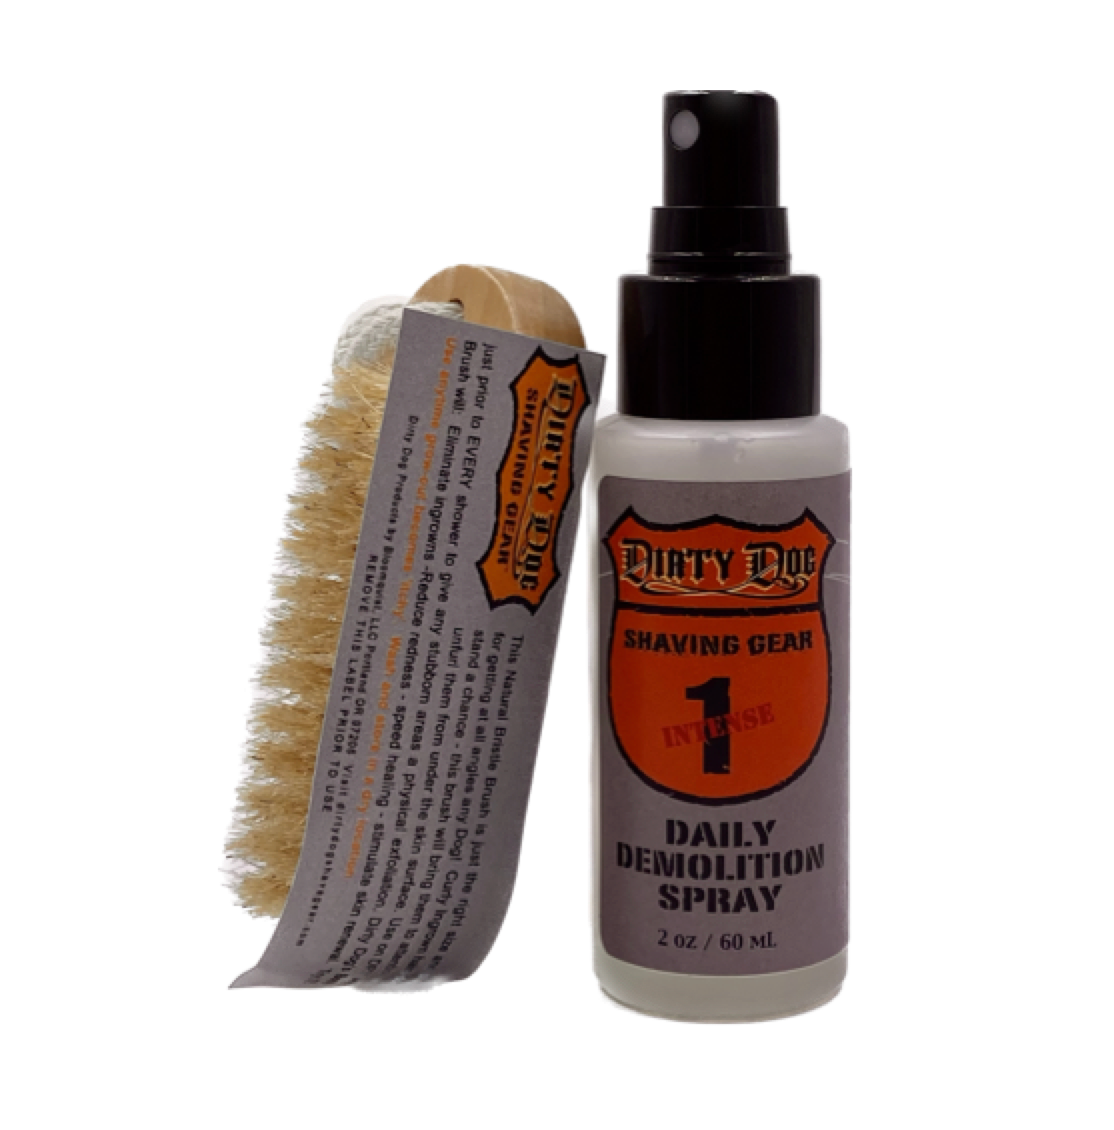 Exfoliation Duo Kit from Dirty Dog Shave Gear - No Ingrown Hair